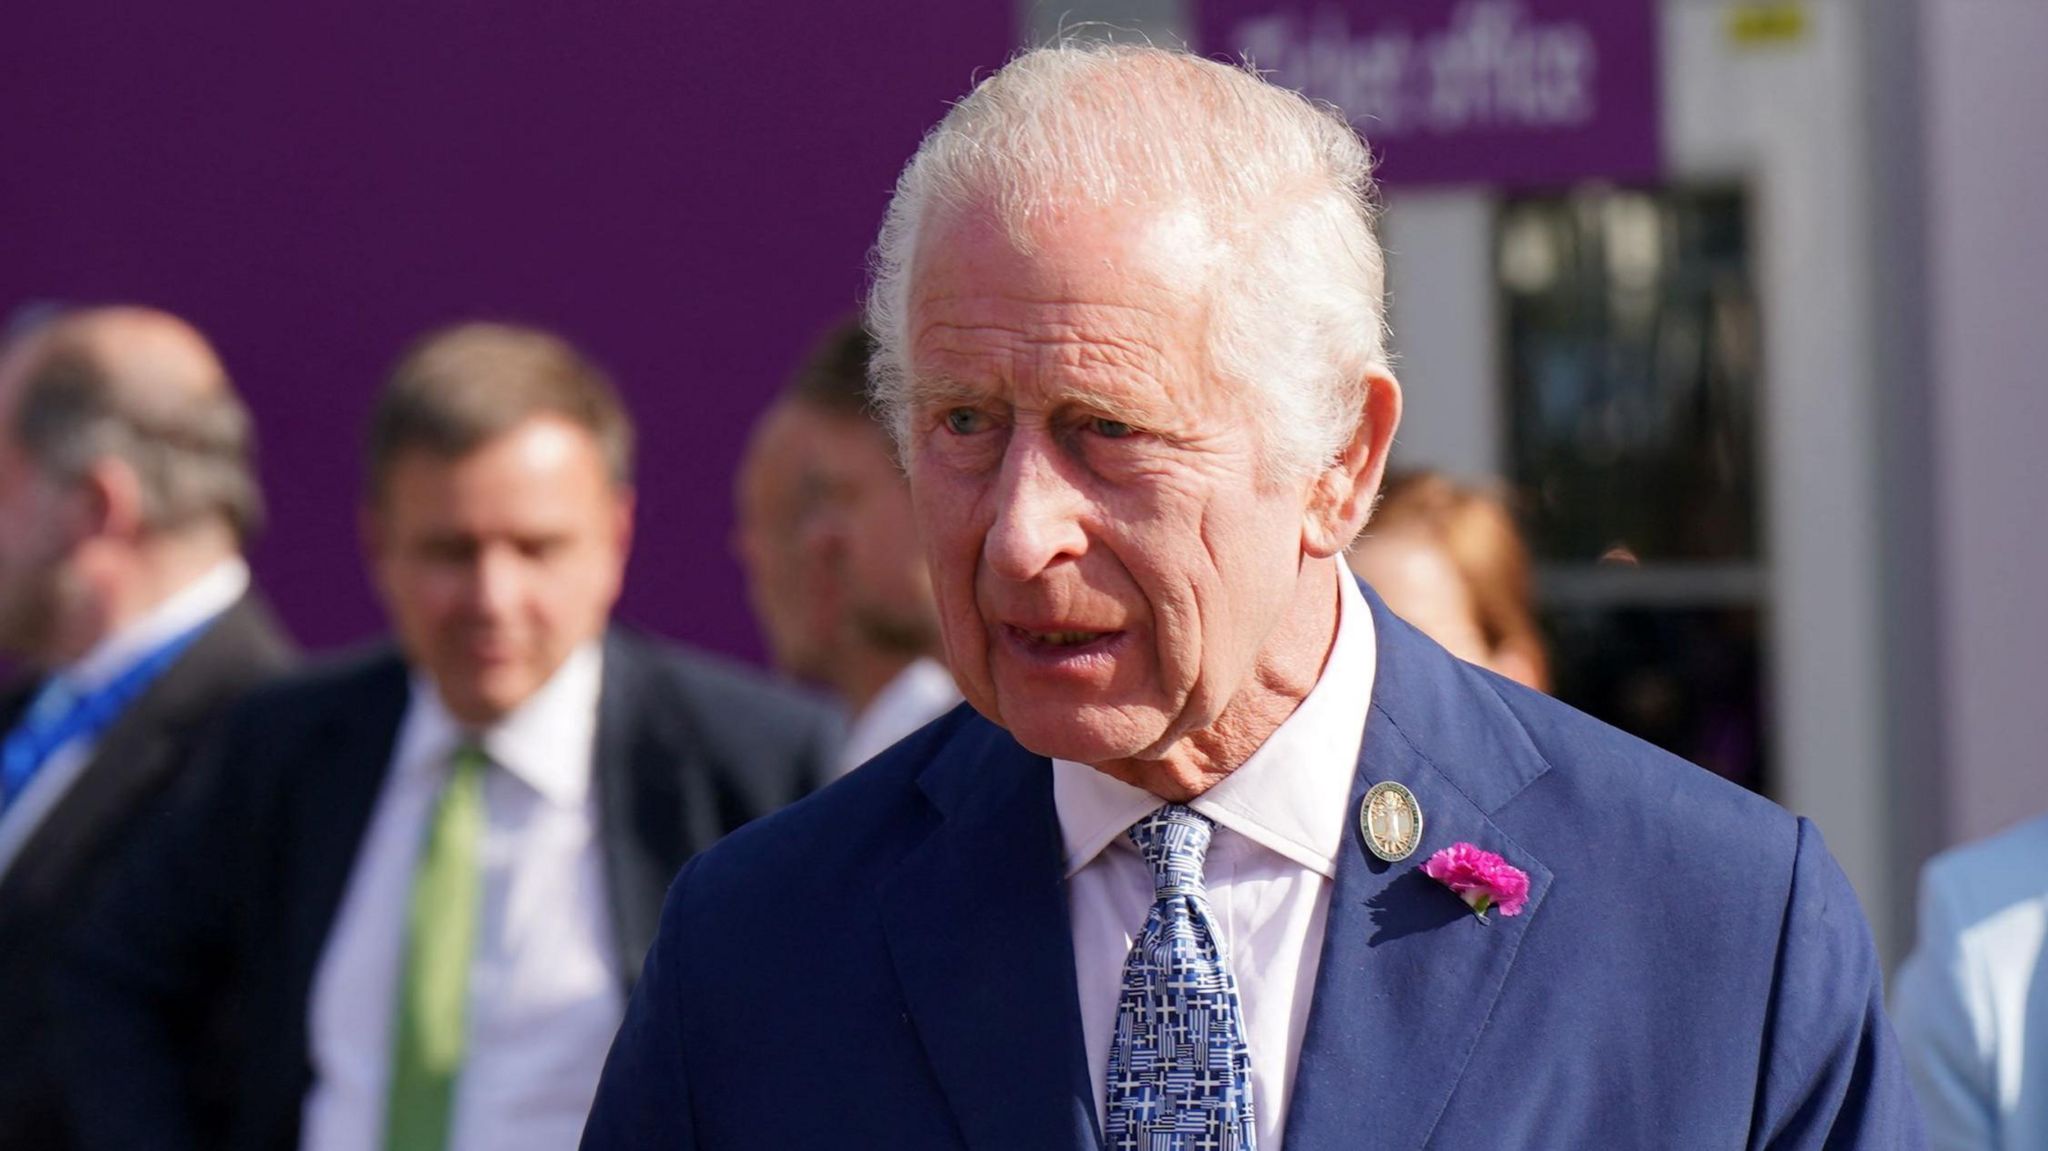 King Charles III at the RHS Chelsea Flower Show